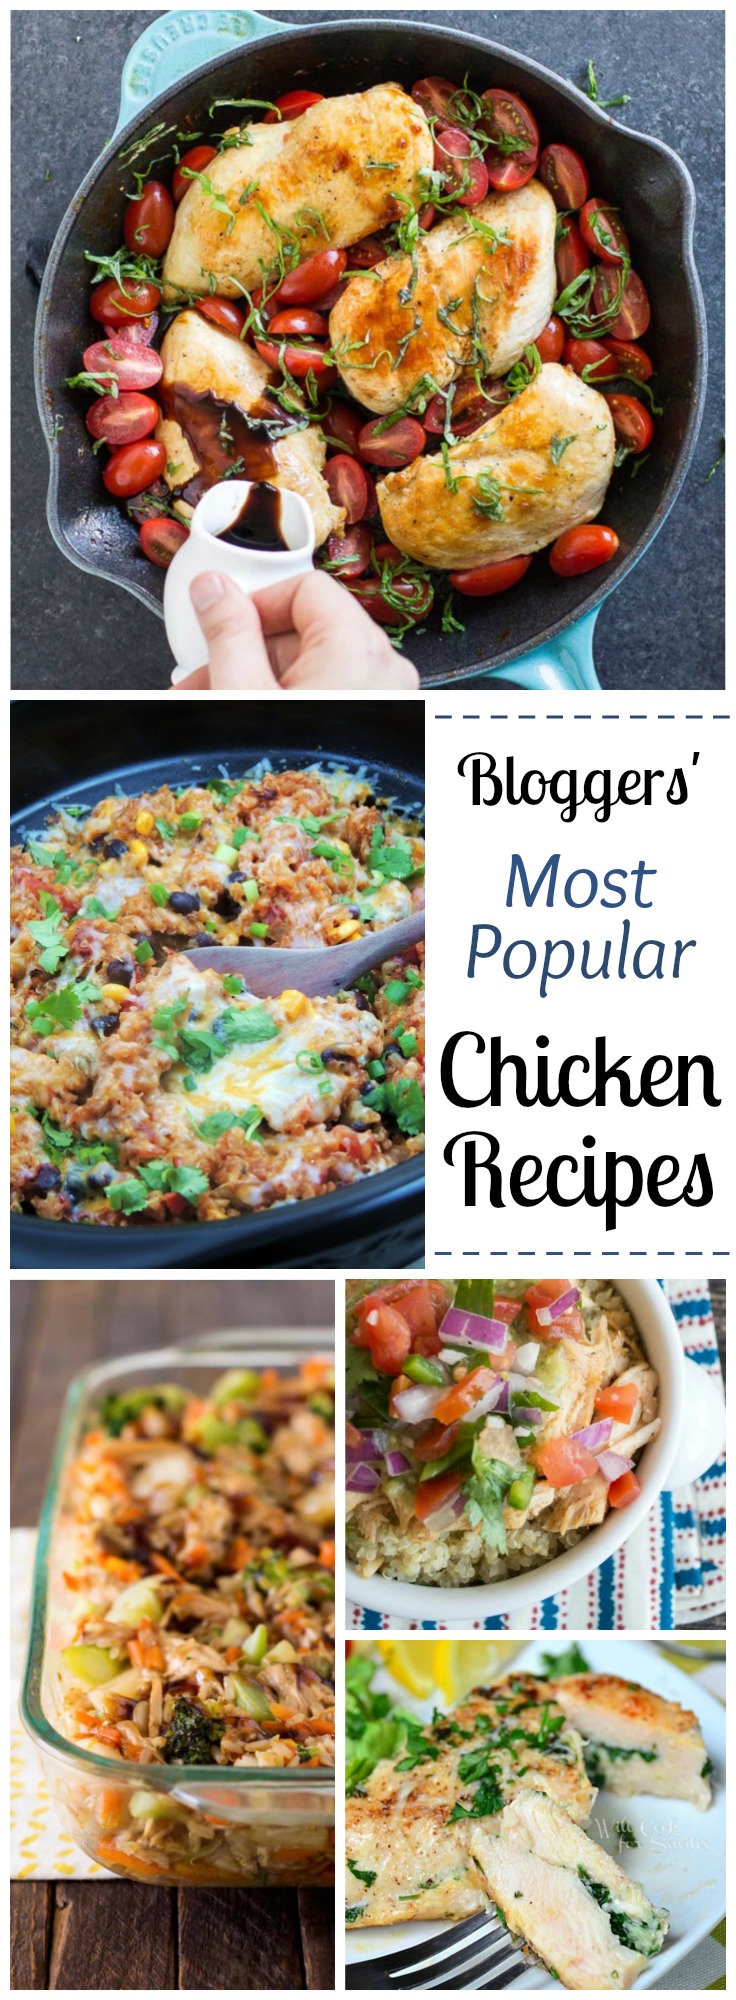 Easy chicken recipes your family will love! We've gathered some of the all-time most popular quick and healthy chicken recipes other bloggers have ever posted. From baked chicken to chicken casseroles, skillet chicken to slow cooker chicken, chicken fajitas to a unique and veggie-loaded chicken stir-fry … and more! These are some of the best chicken recipes ever - reader favorite recipes you’ll want to make again and again. Perfect dinners for busy weeknights! | www.TwoHealthyKitchens.com